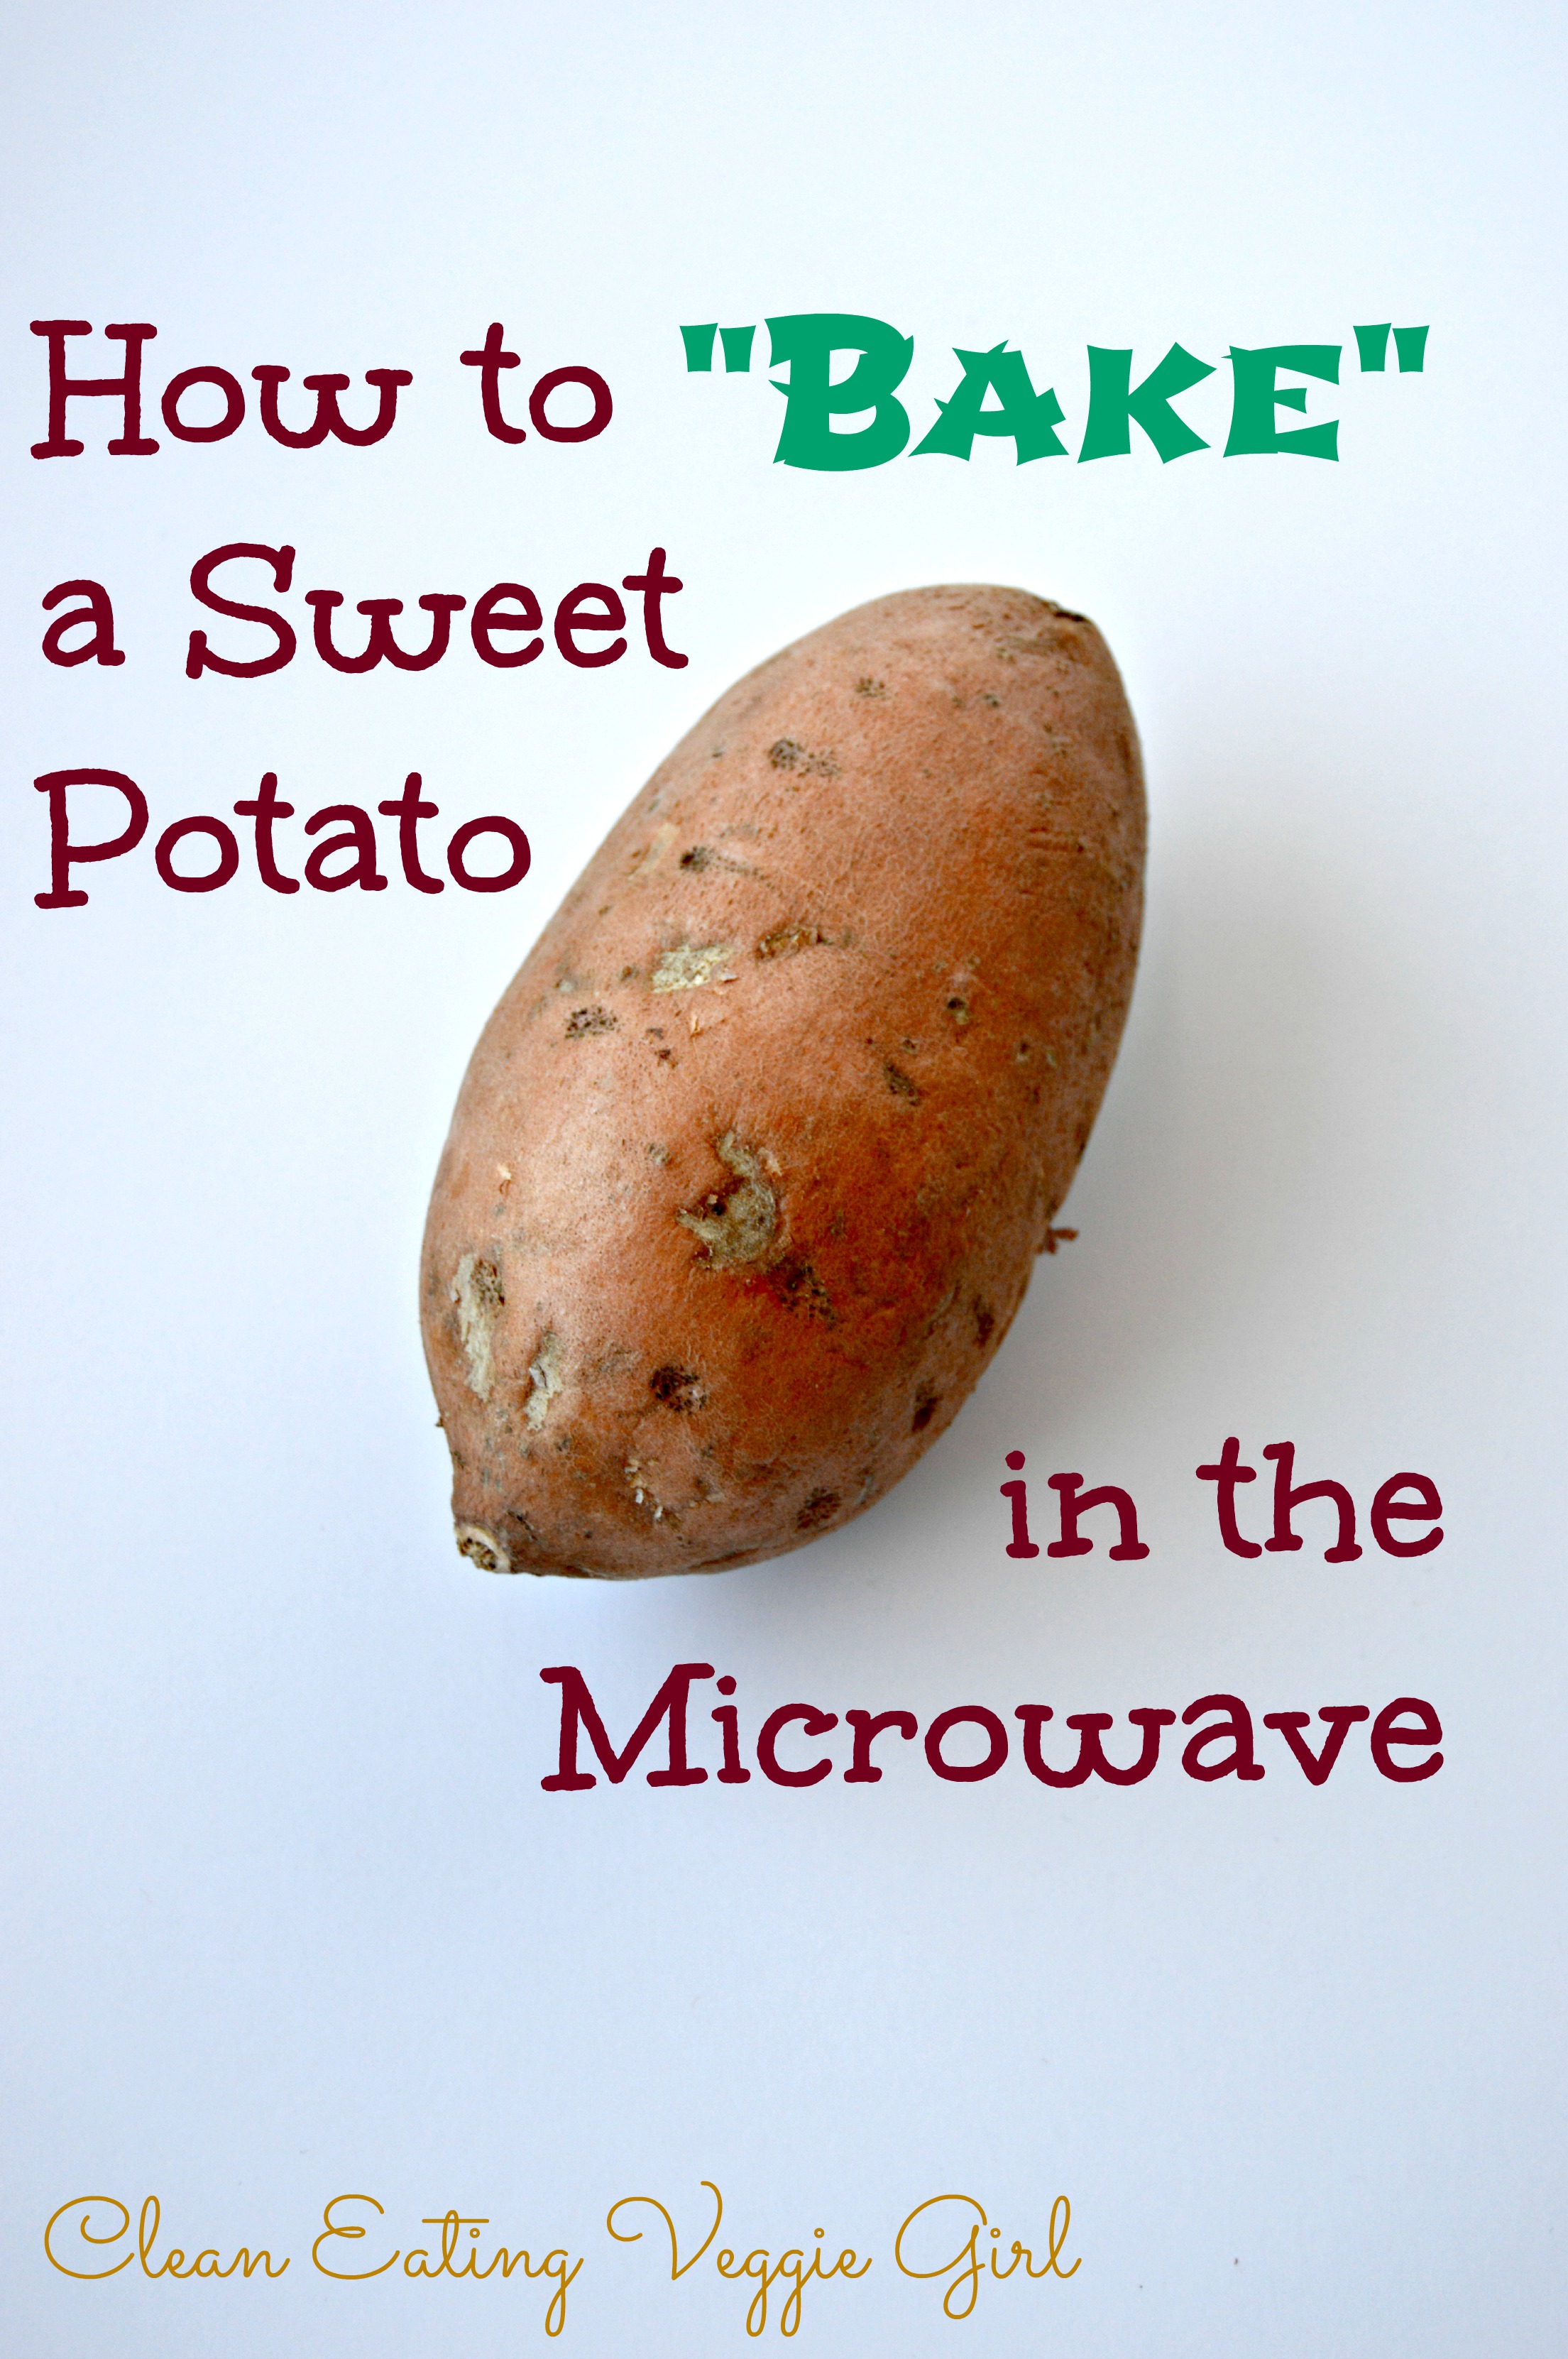 How to Make a Baked Sweet Potato in the Microwave - Clean Eating Veggie